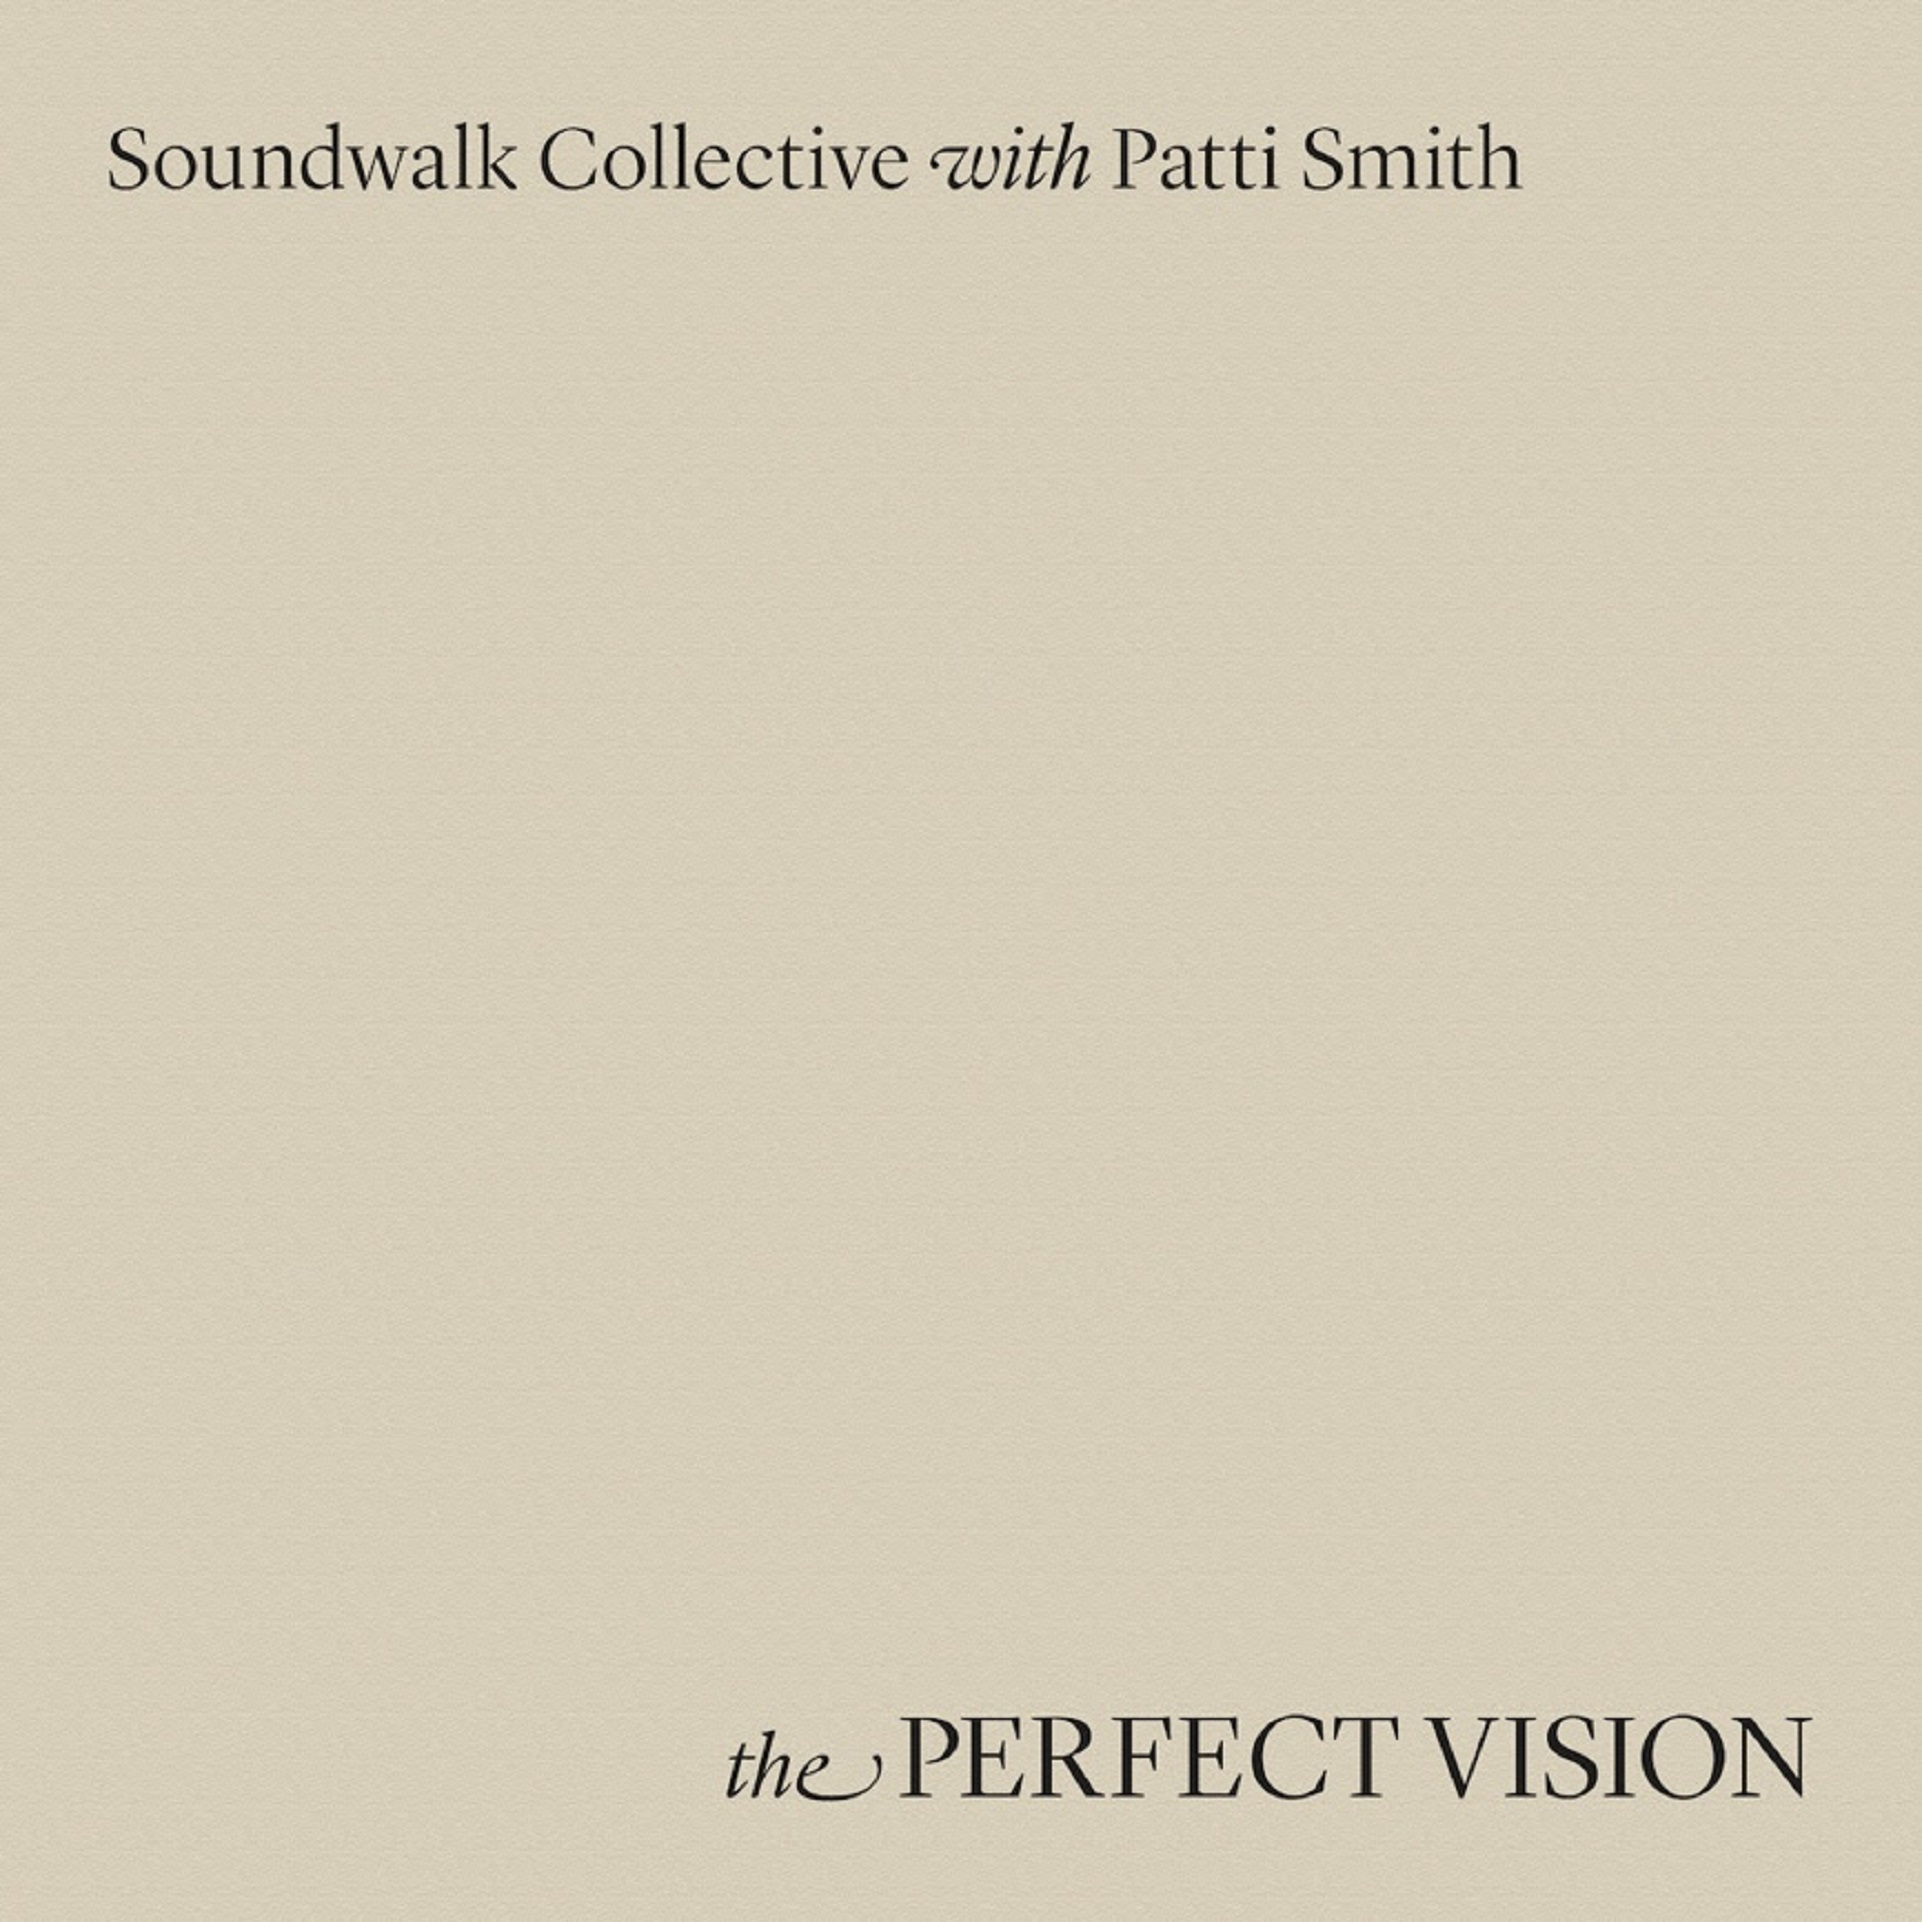 Kaitlyn Aurelia Smith, Brian Eno & More Contribute Remixes On Soundwalk Collective With Patti Smith’s Deluxe Box Release Of ‘The Perfect Vision’